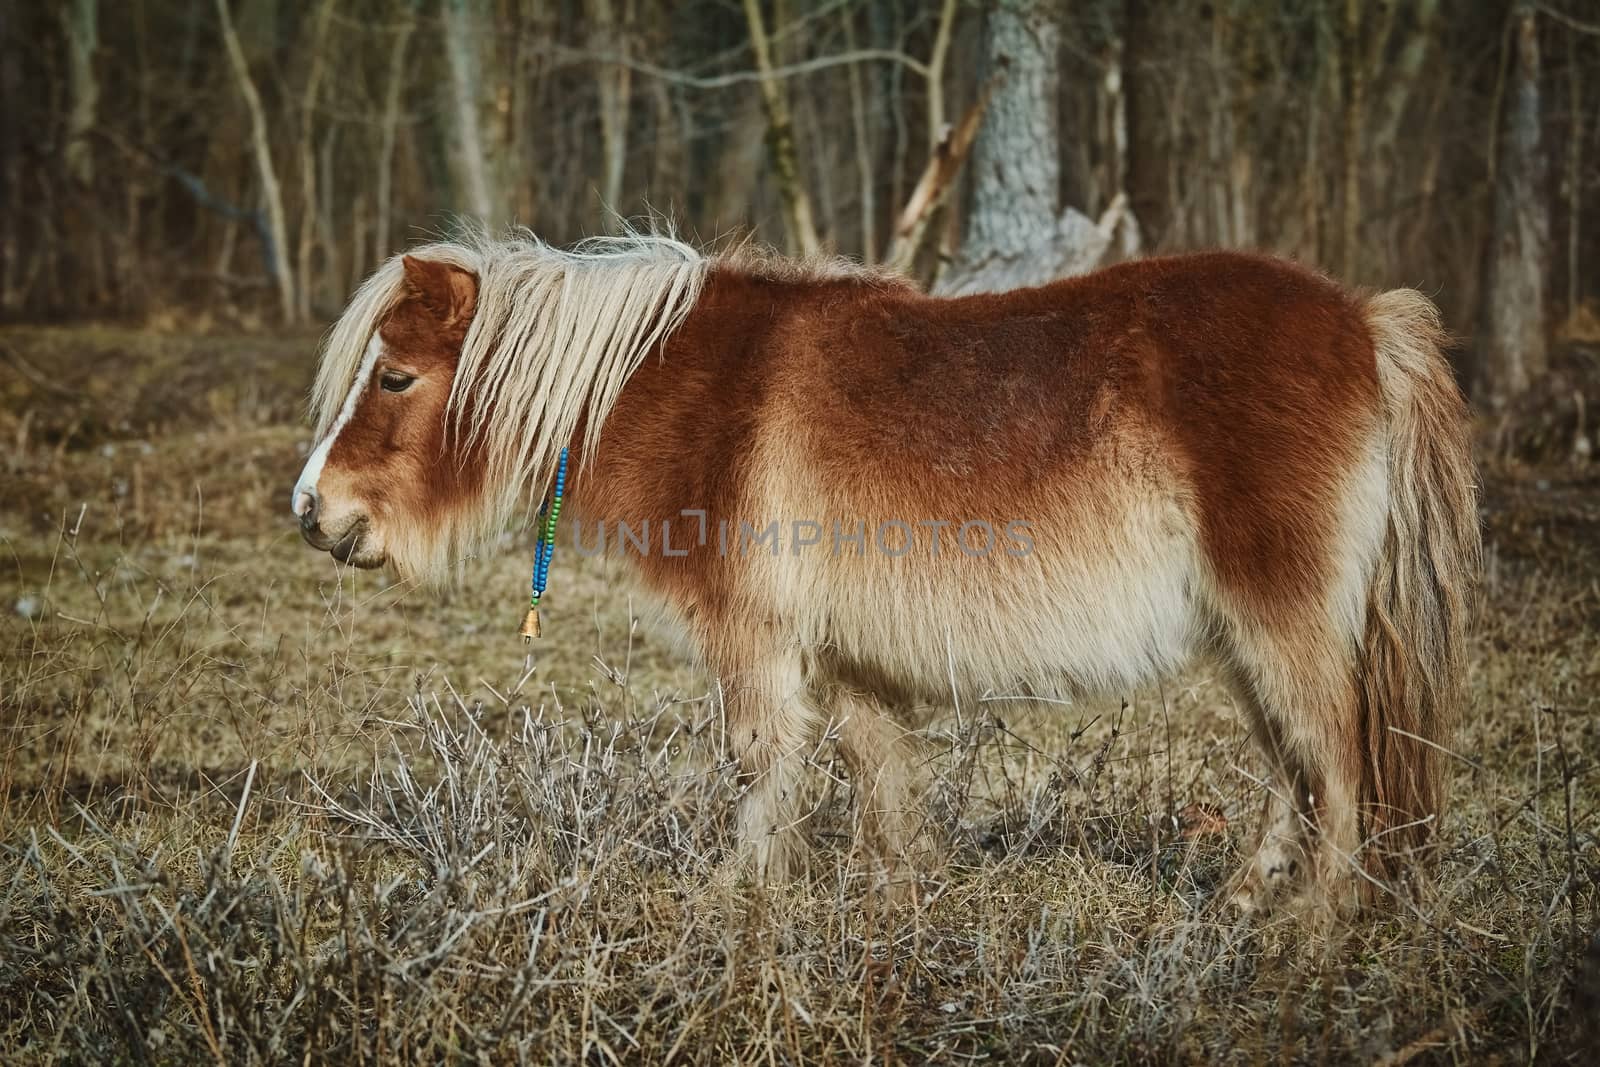 Little Brown Pony by SNR